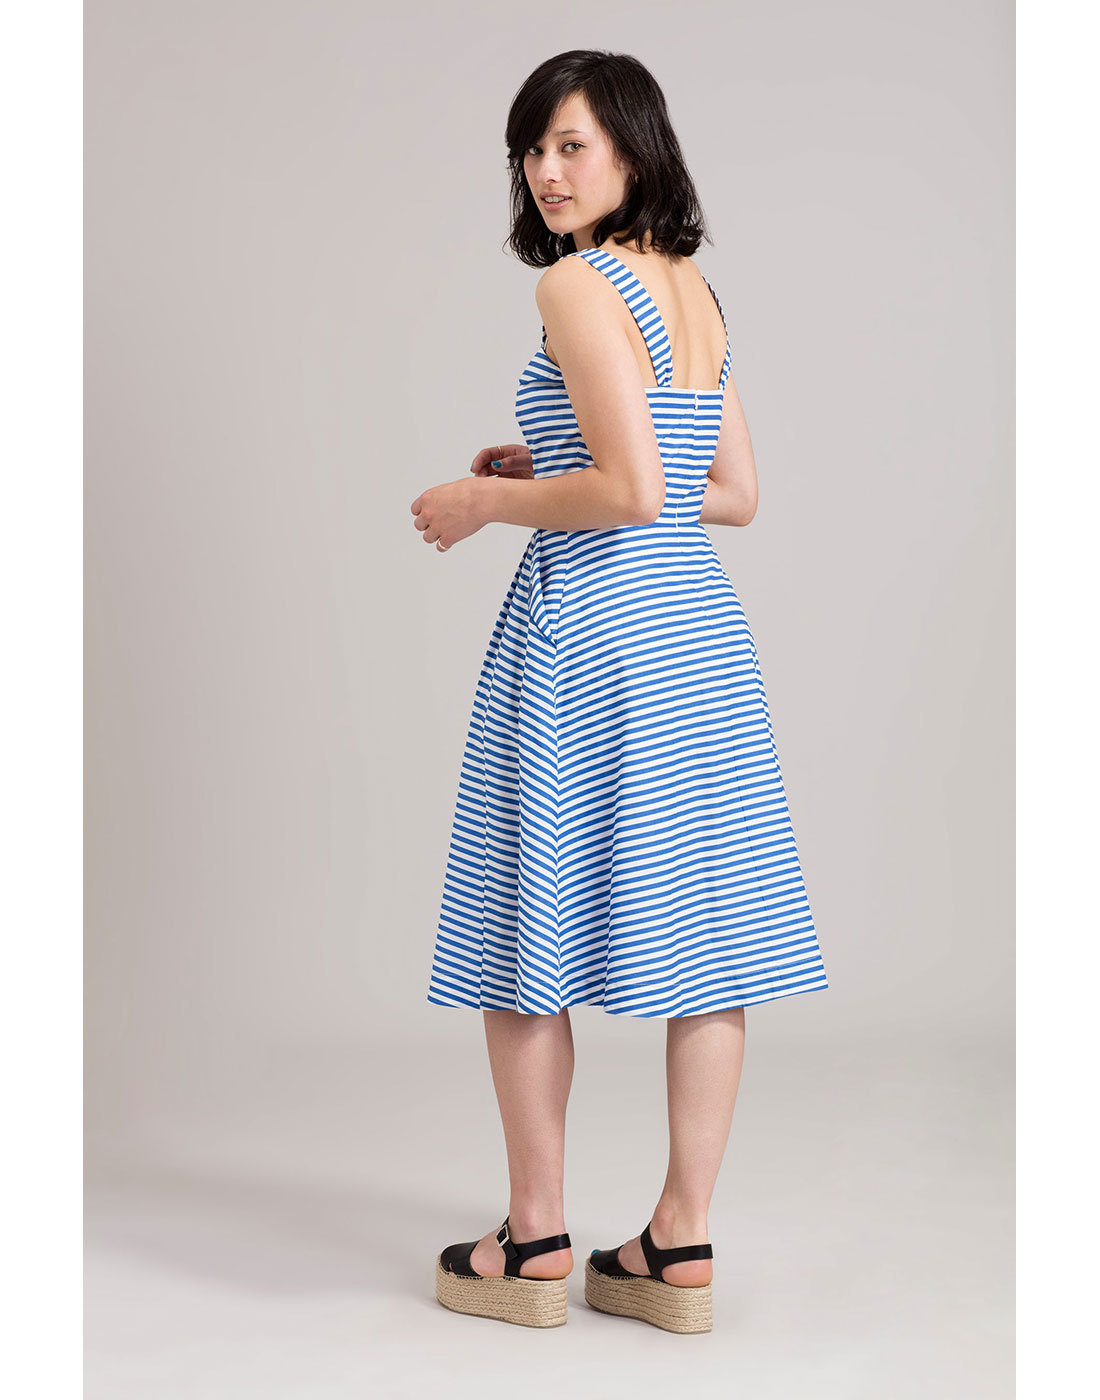 Emily and Fin Pippa Retro Vintage 50s Summer Dress Blue Stripes